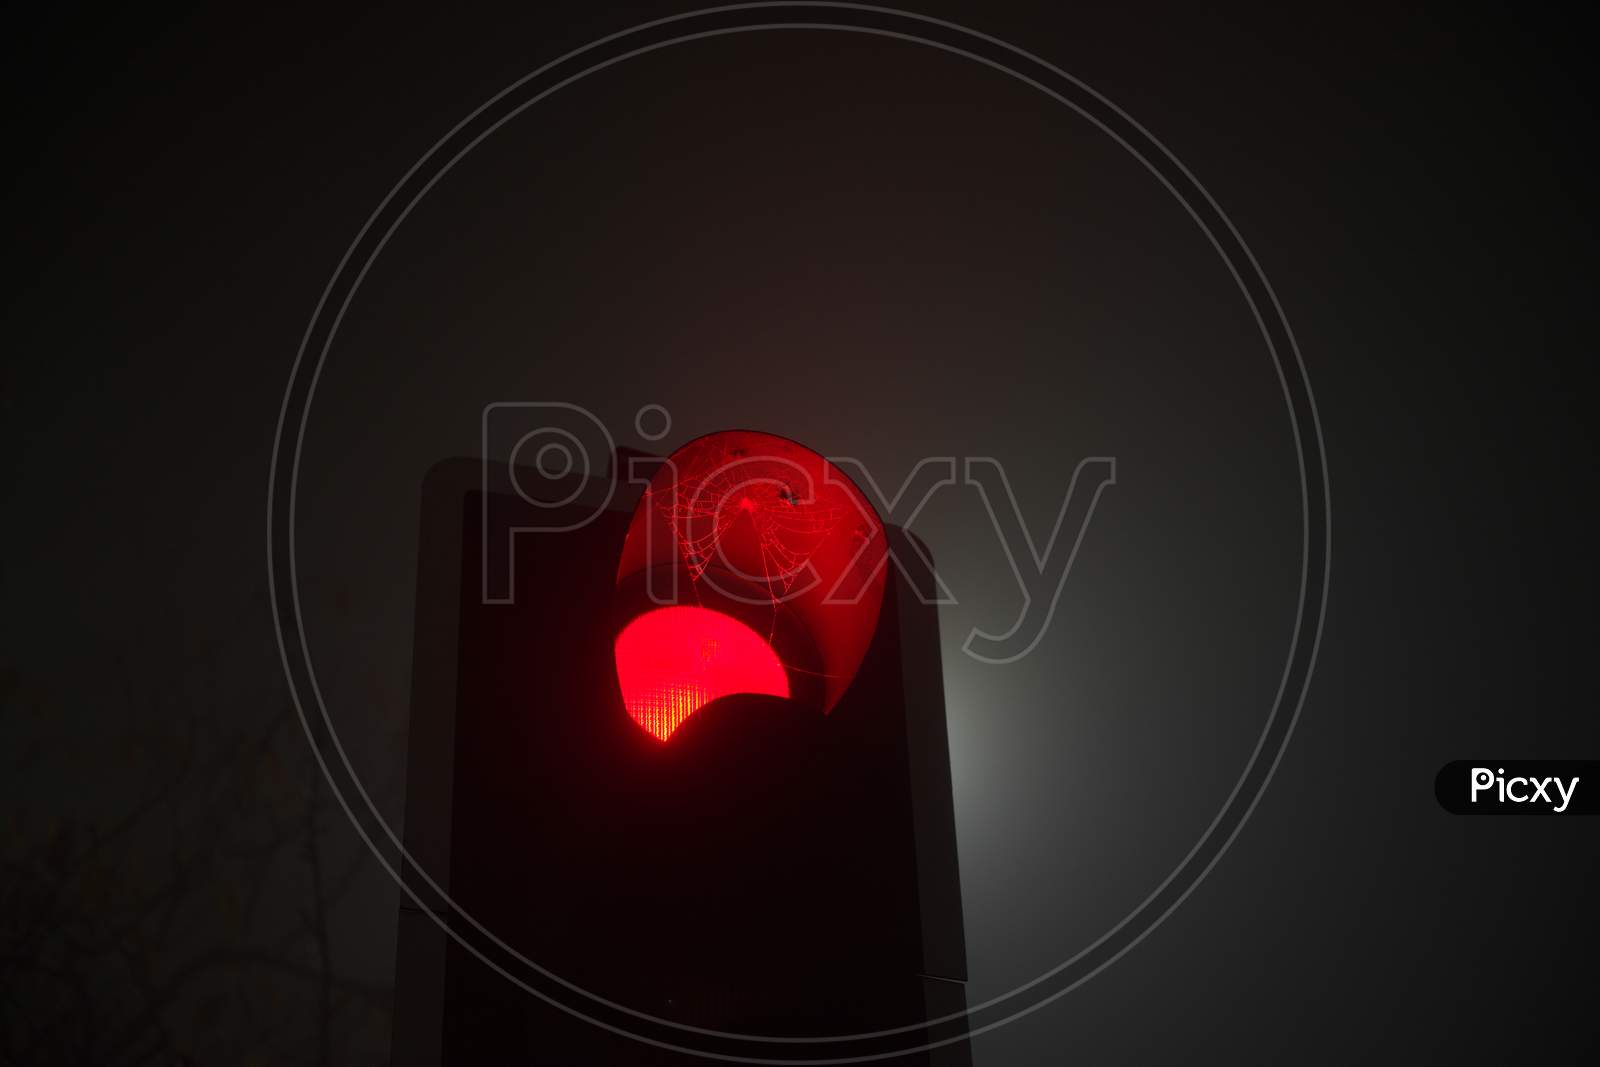 A British Traffic Light Shines Red, Indicating Stop, During Night Fog